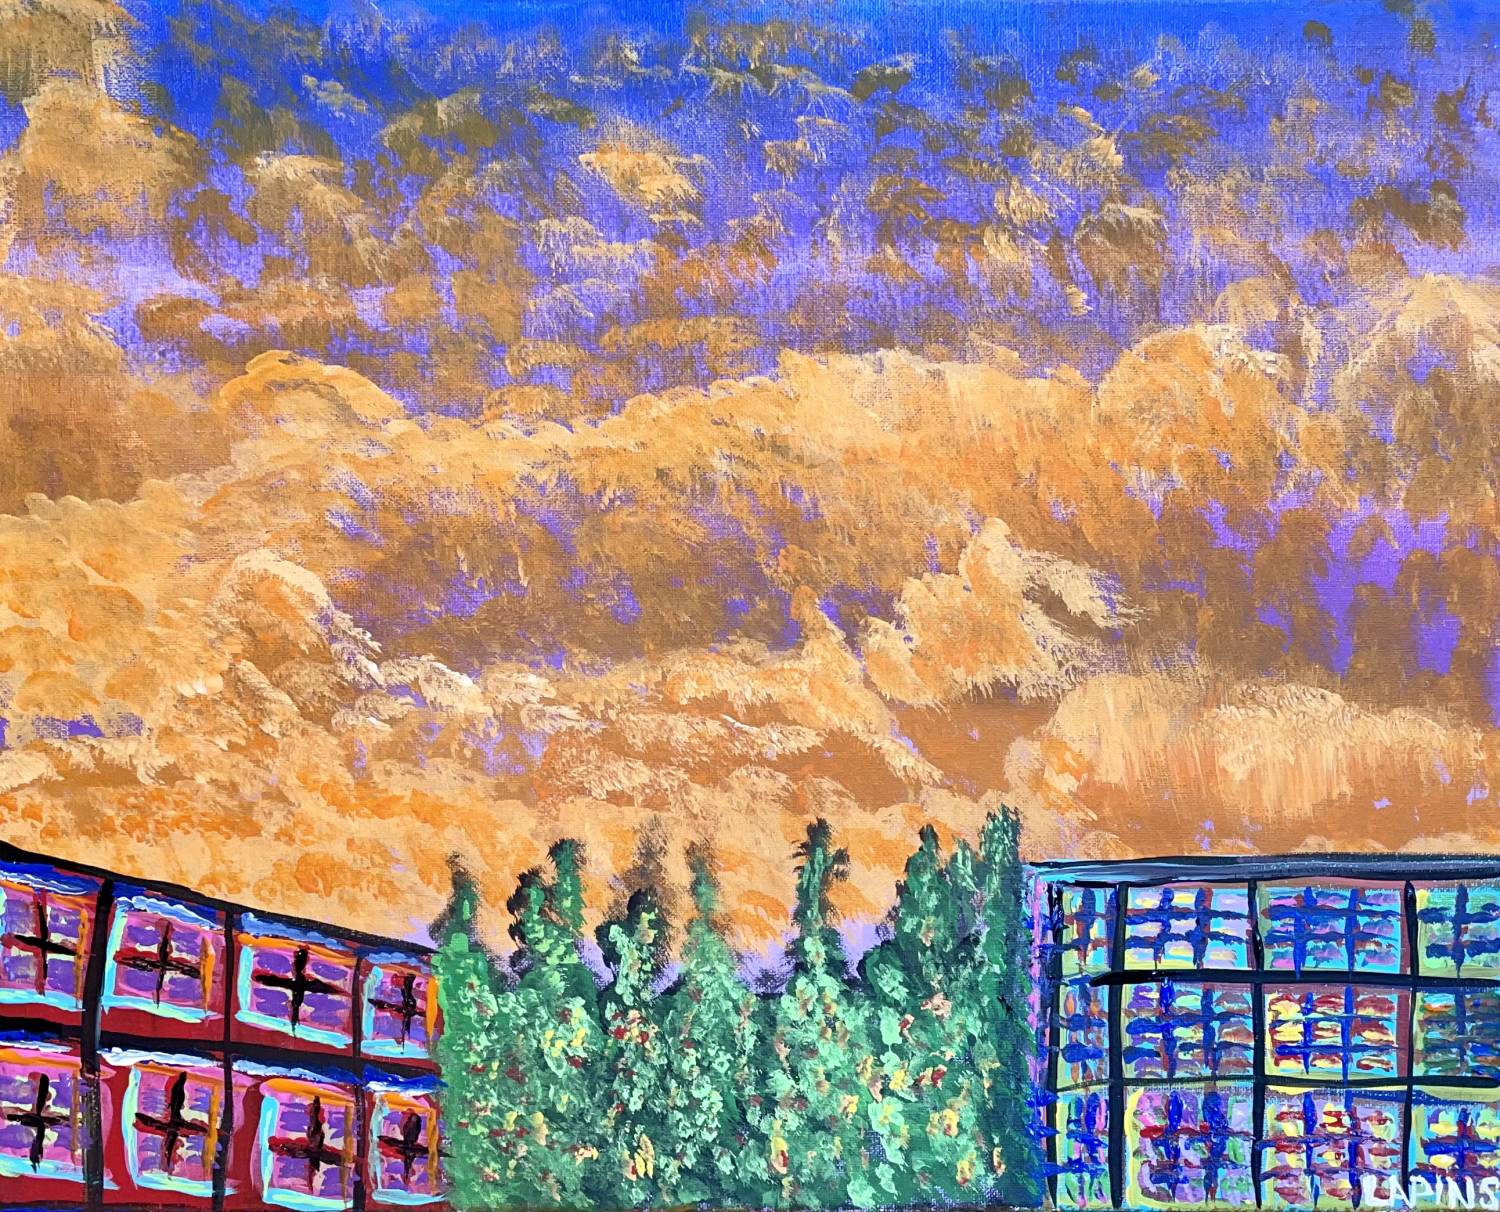 Artist Kenny Lapins' piece, "Beautiful Sky on a Terrible Day,” which features a beautiful orange, purple and blue sky above buildings and trees